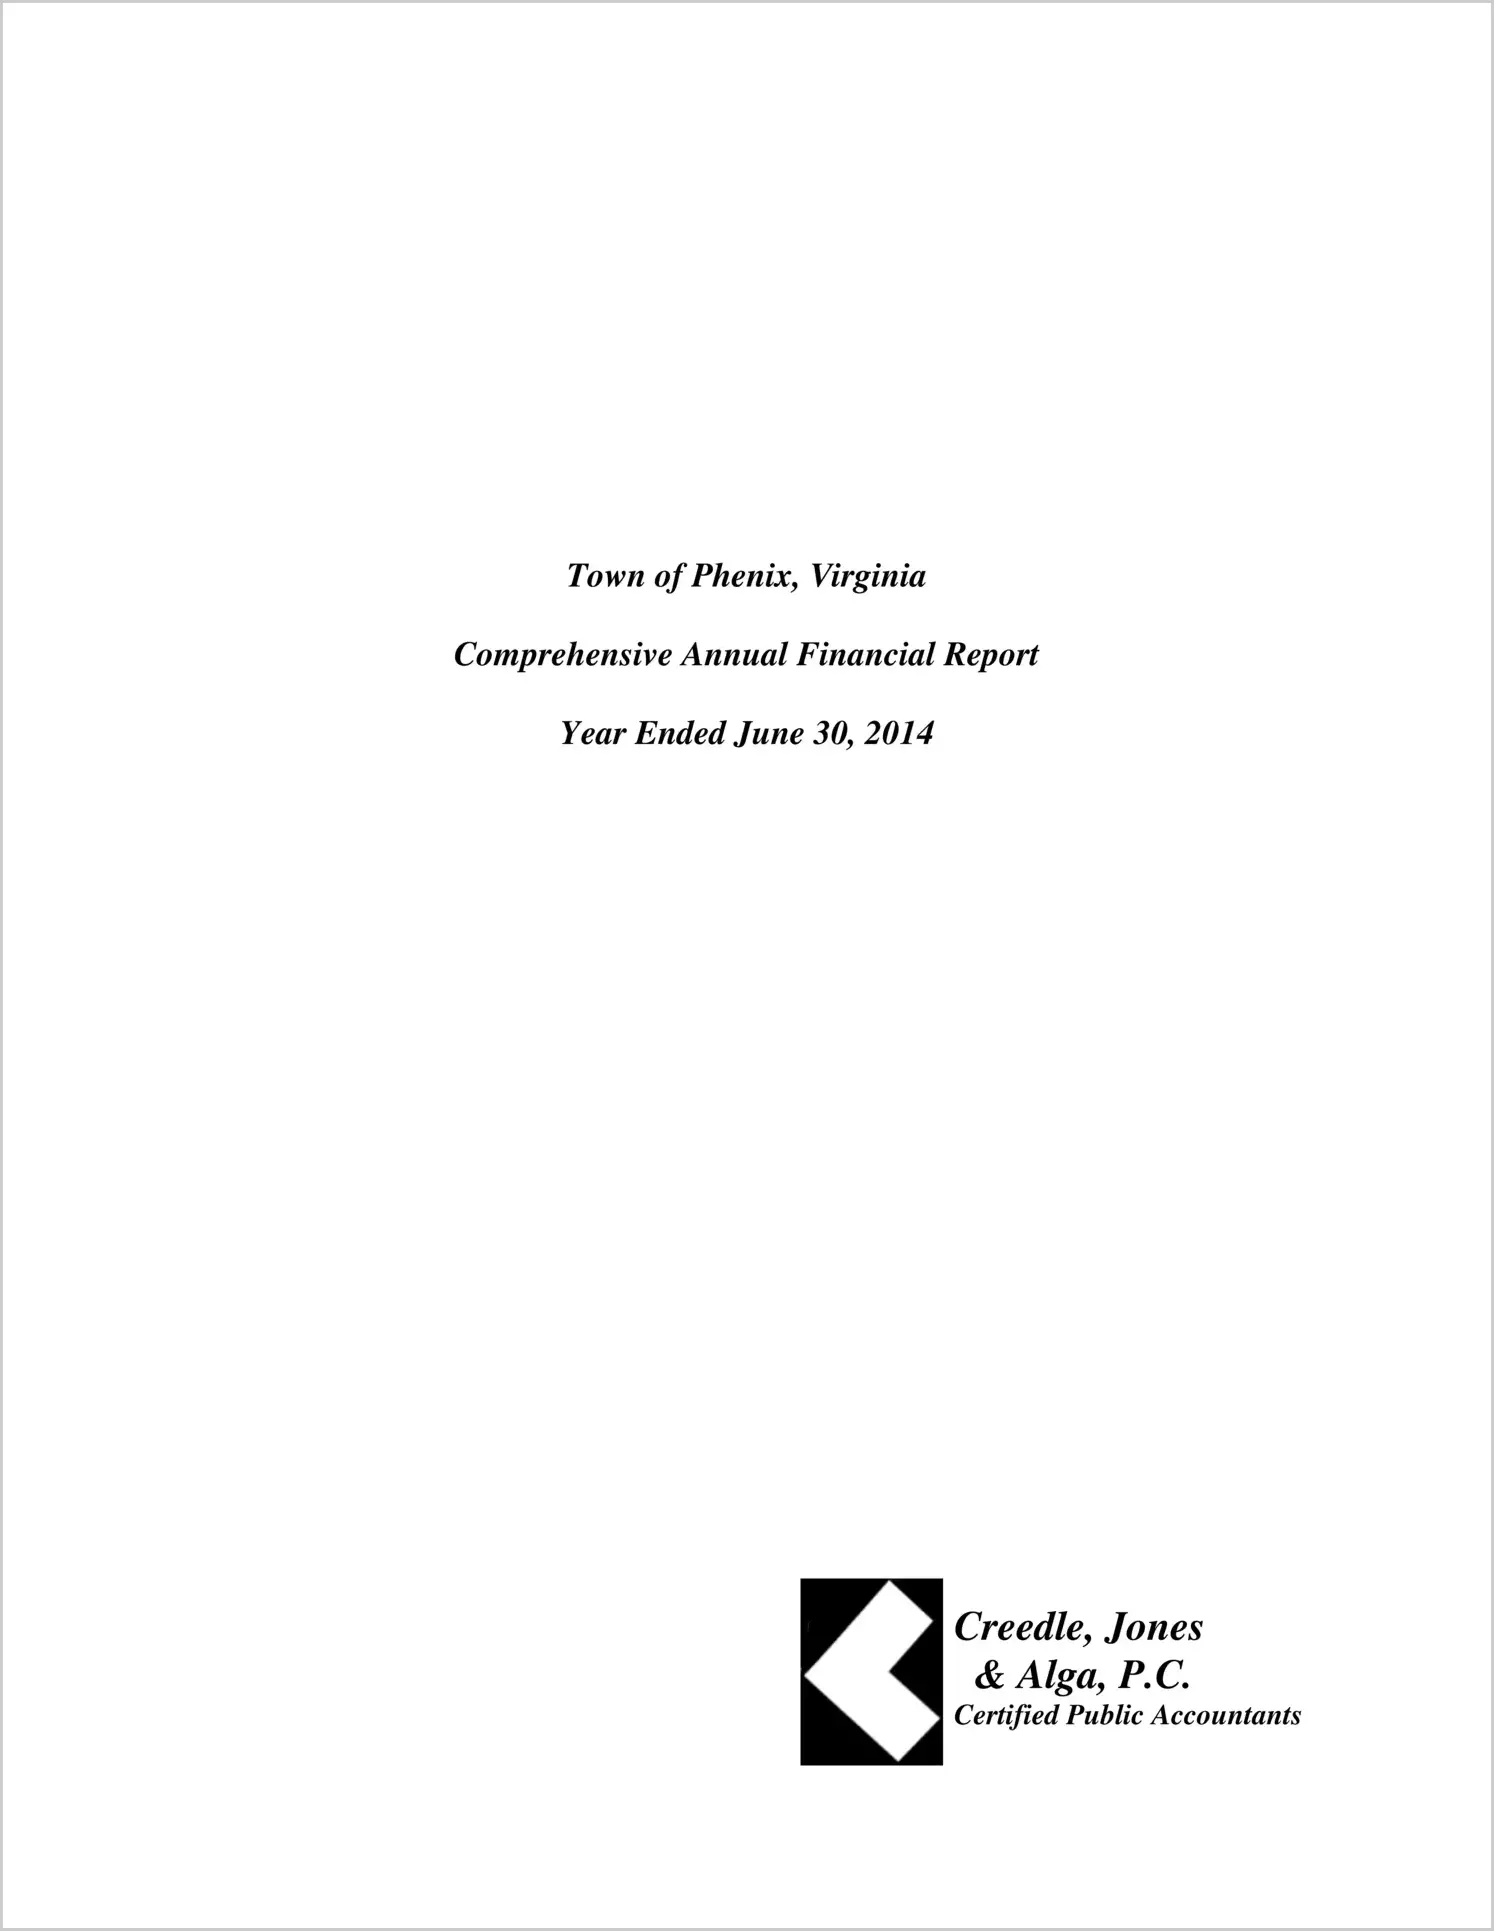 2014 Annual Financial Report for Town of Phenix